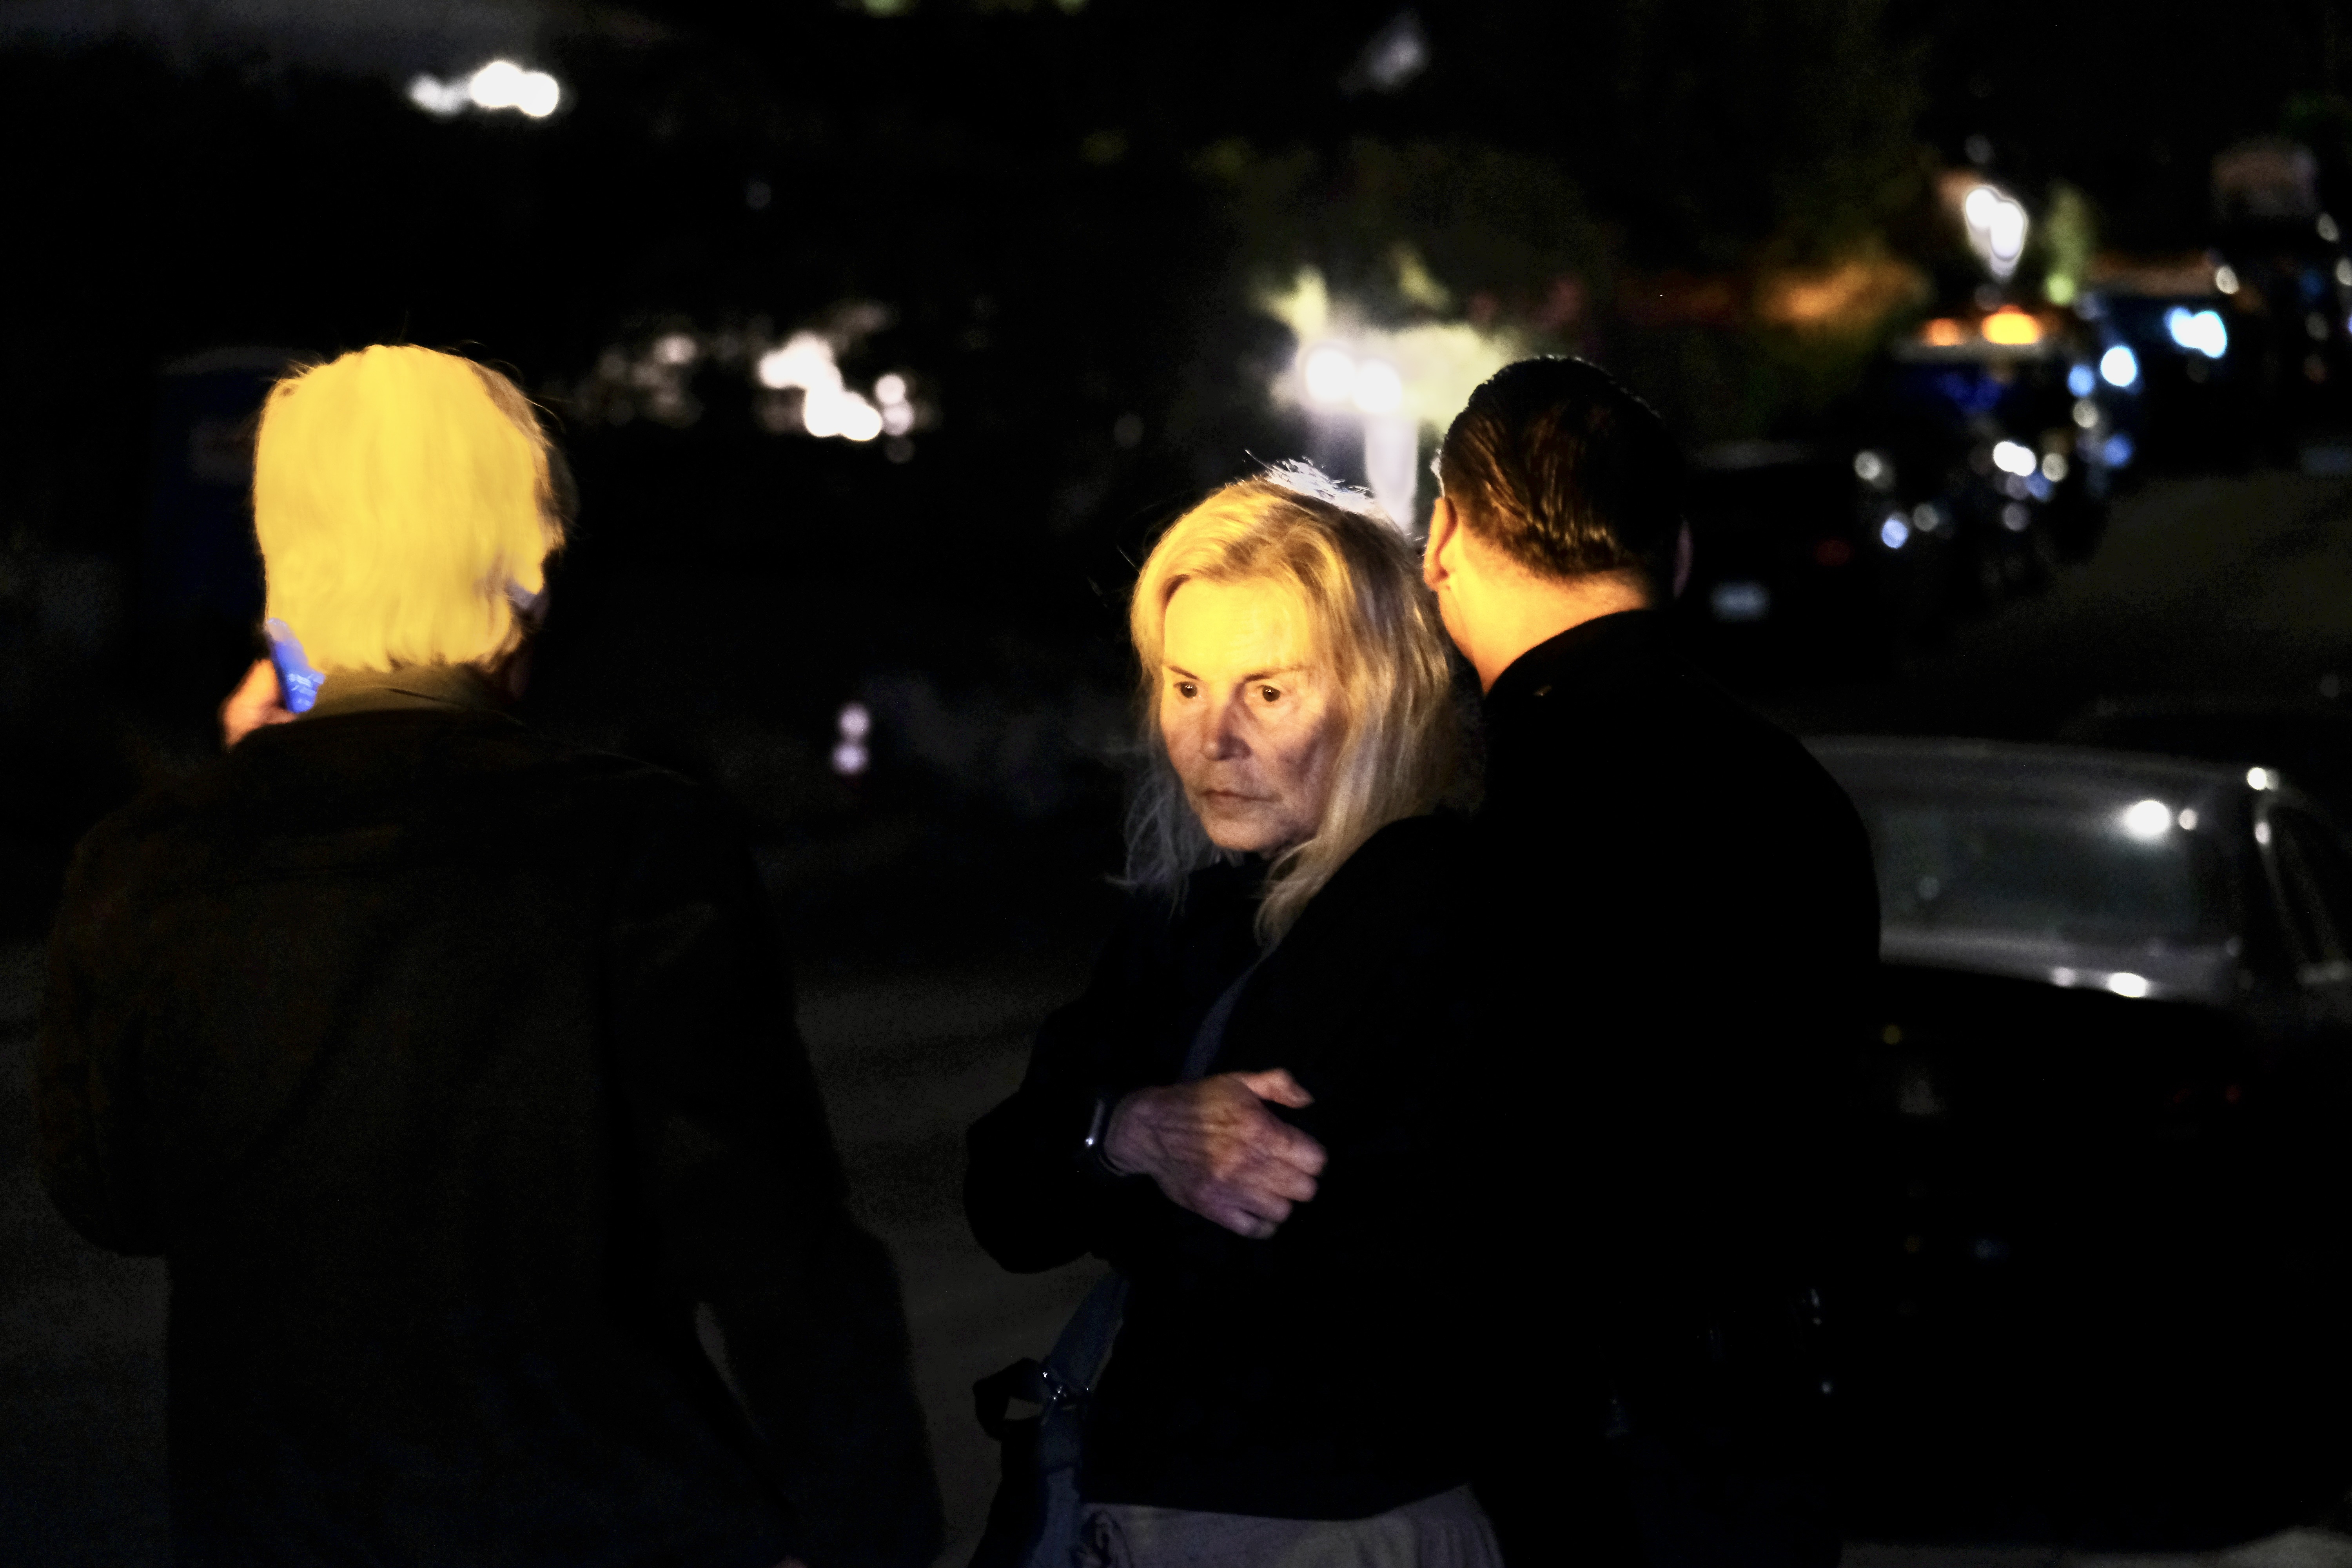 Matthew Perry's stepfather, Keith Morrison, and mother Suzanne Perry, are seen outside of Perry's home on the night he died, October 28, 2023 in Pacific Palisades, California | Source: Getty Images